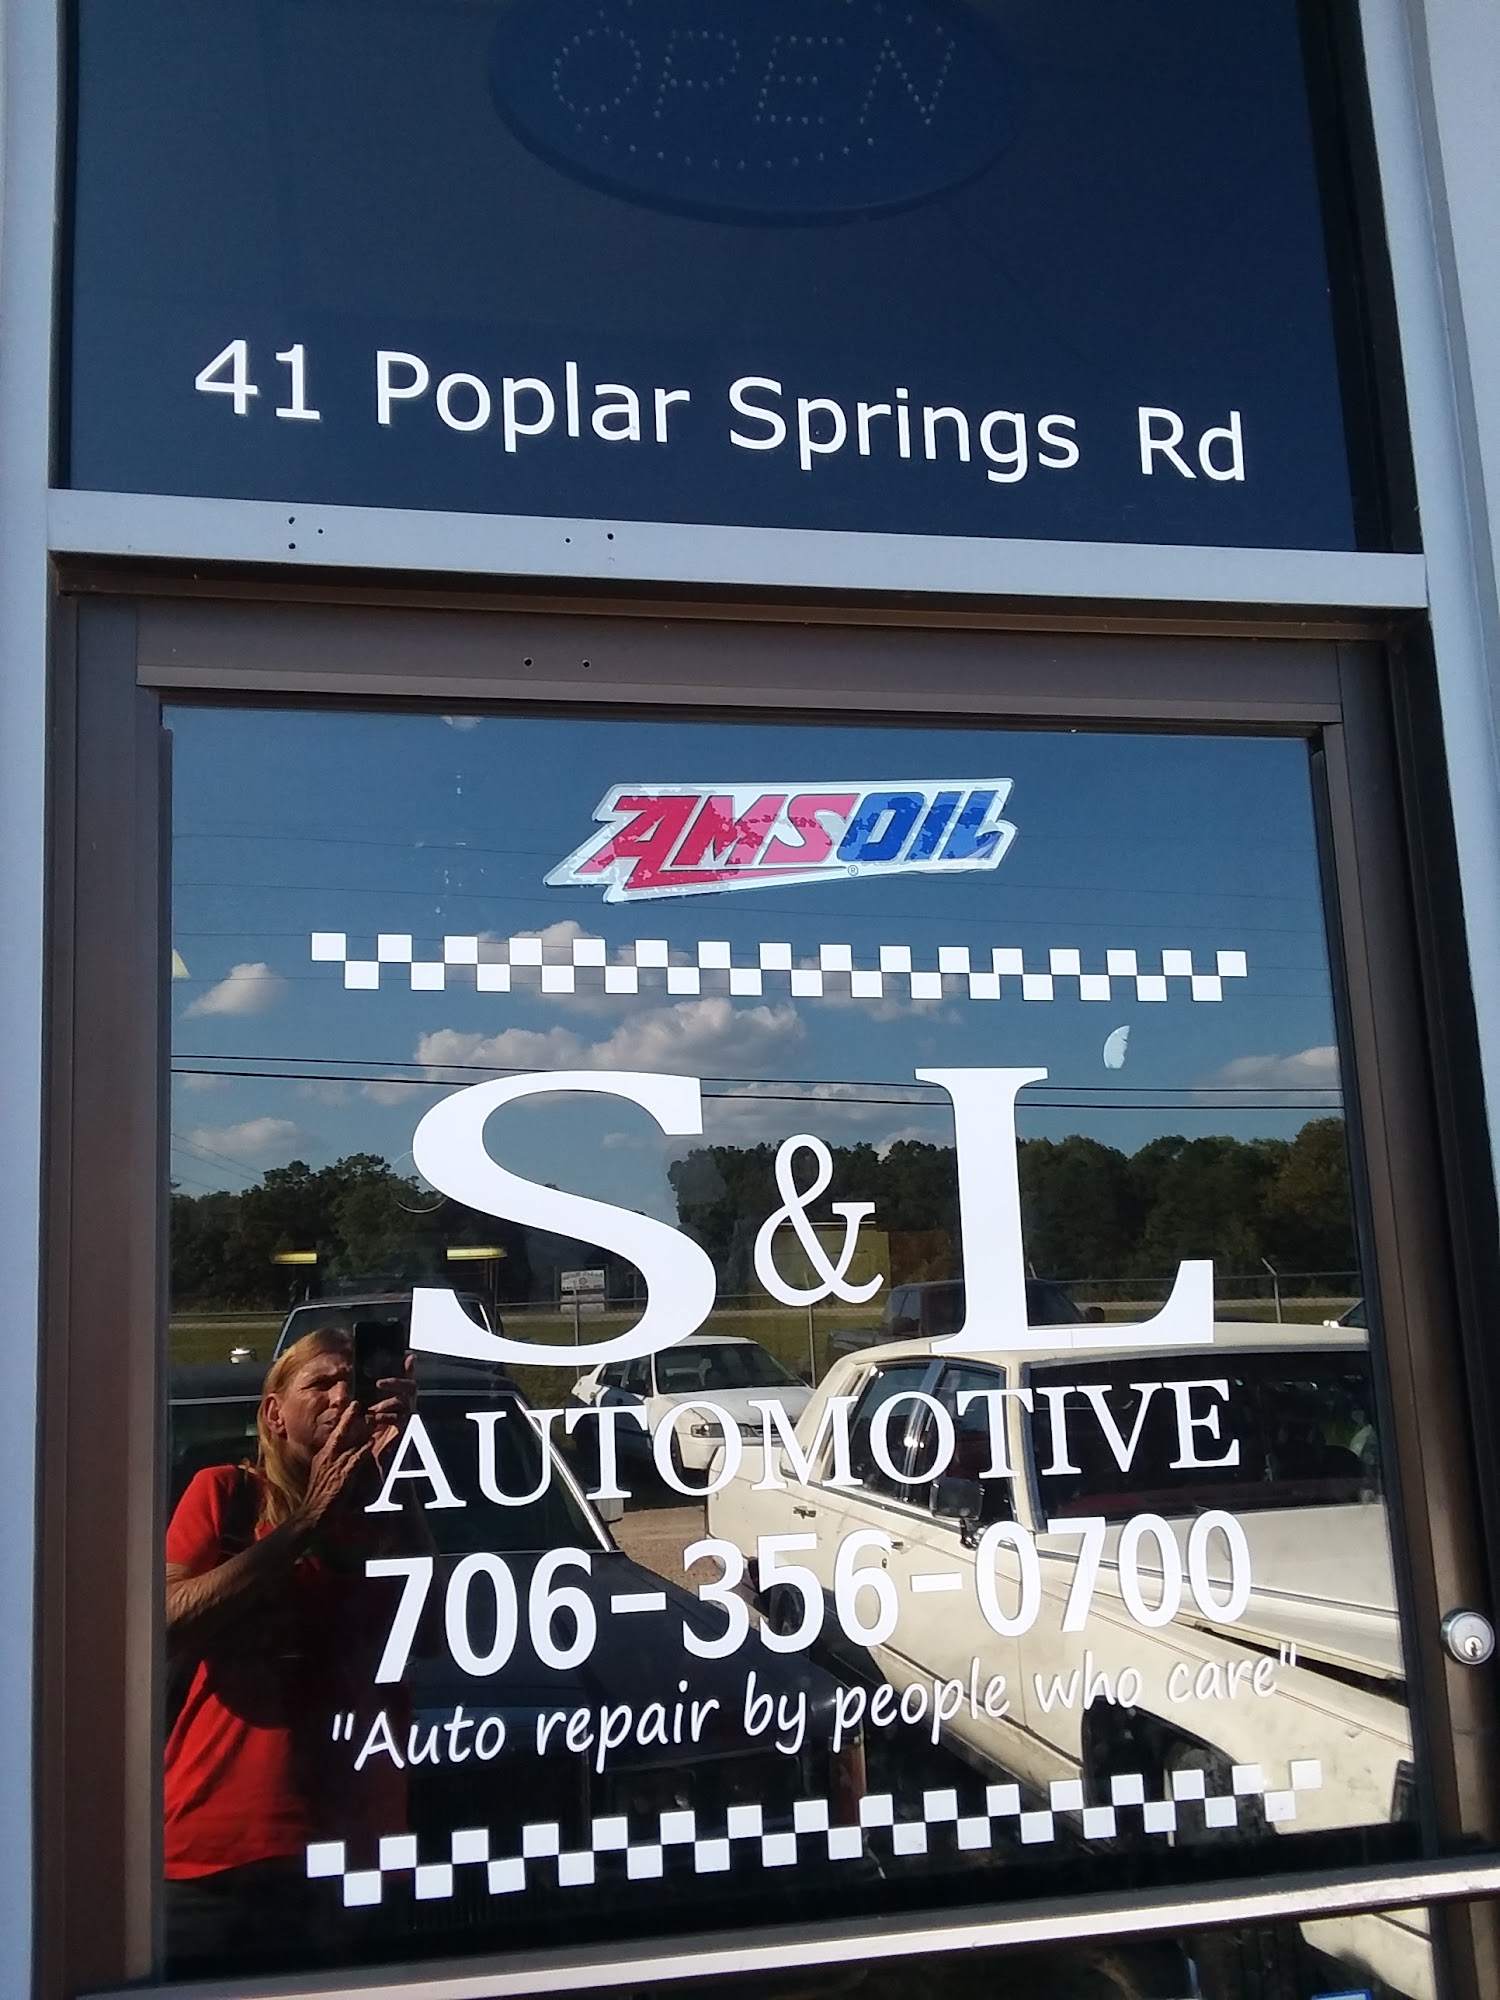 S and L Automotive